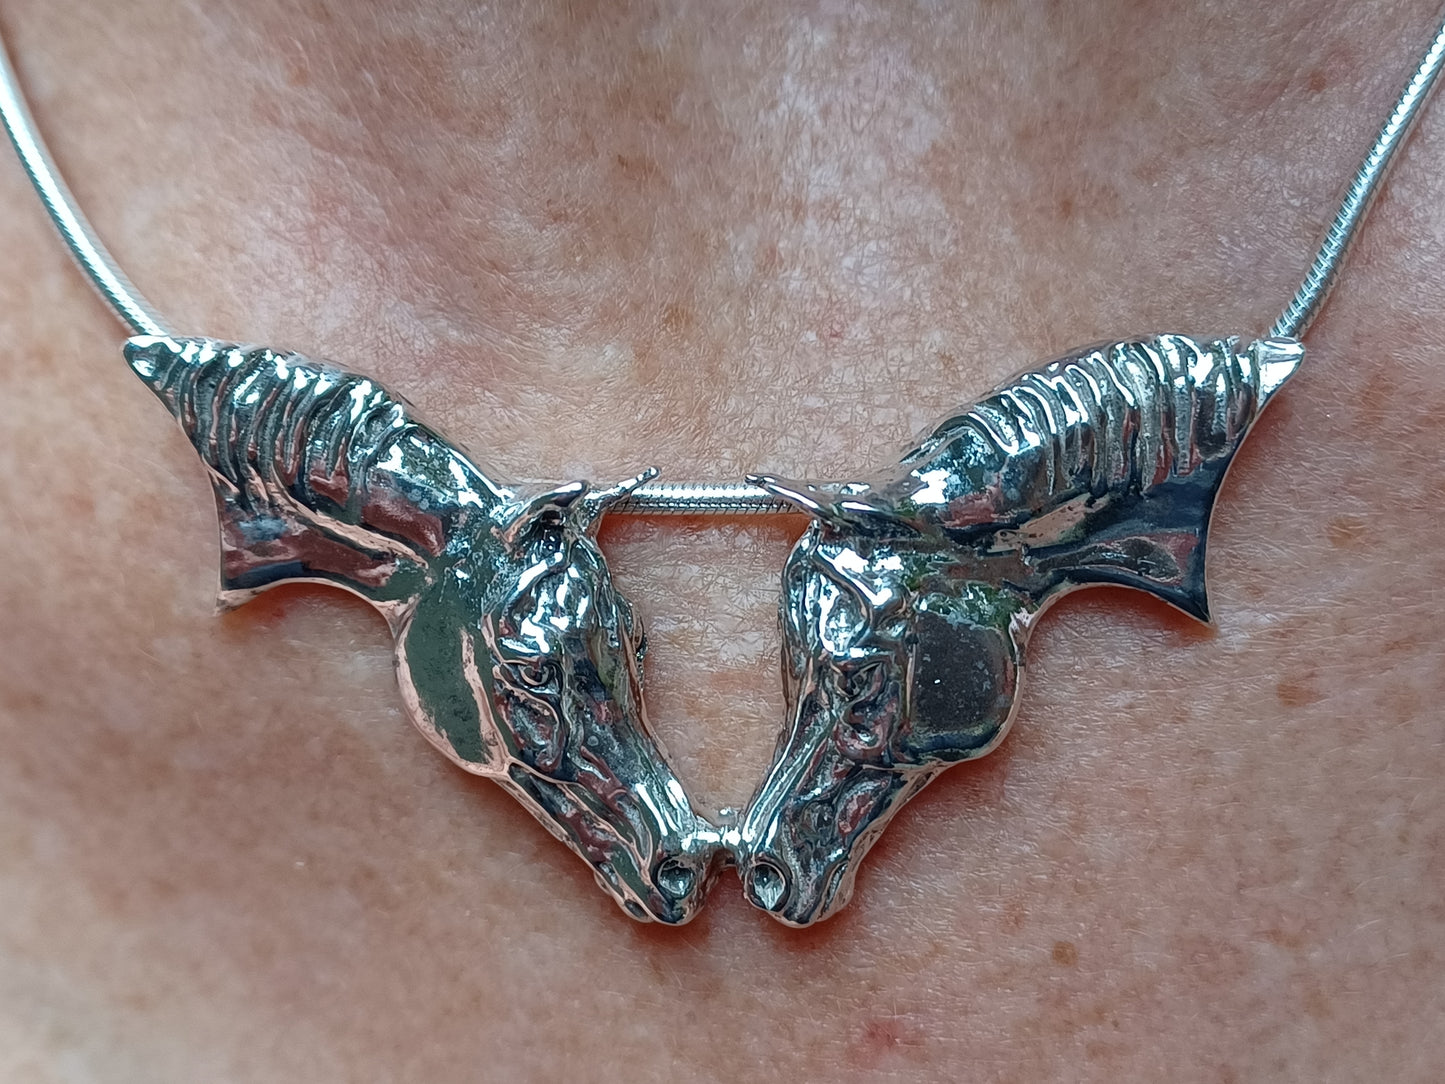 Thoroughbred Nose to Nose pendant and chain Sterling Silver, Sweet necklace from Forge Hill Sculpture.  Zimmer design 2023